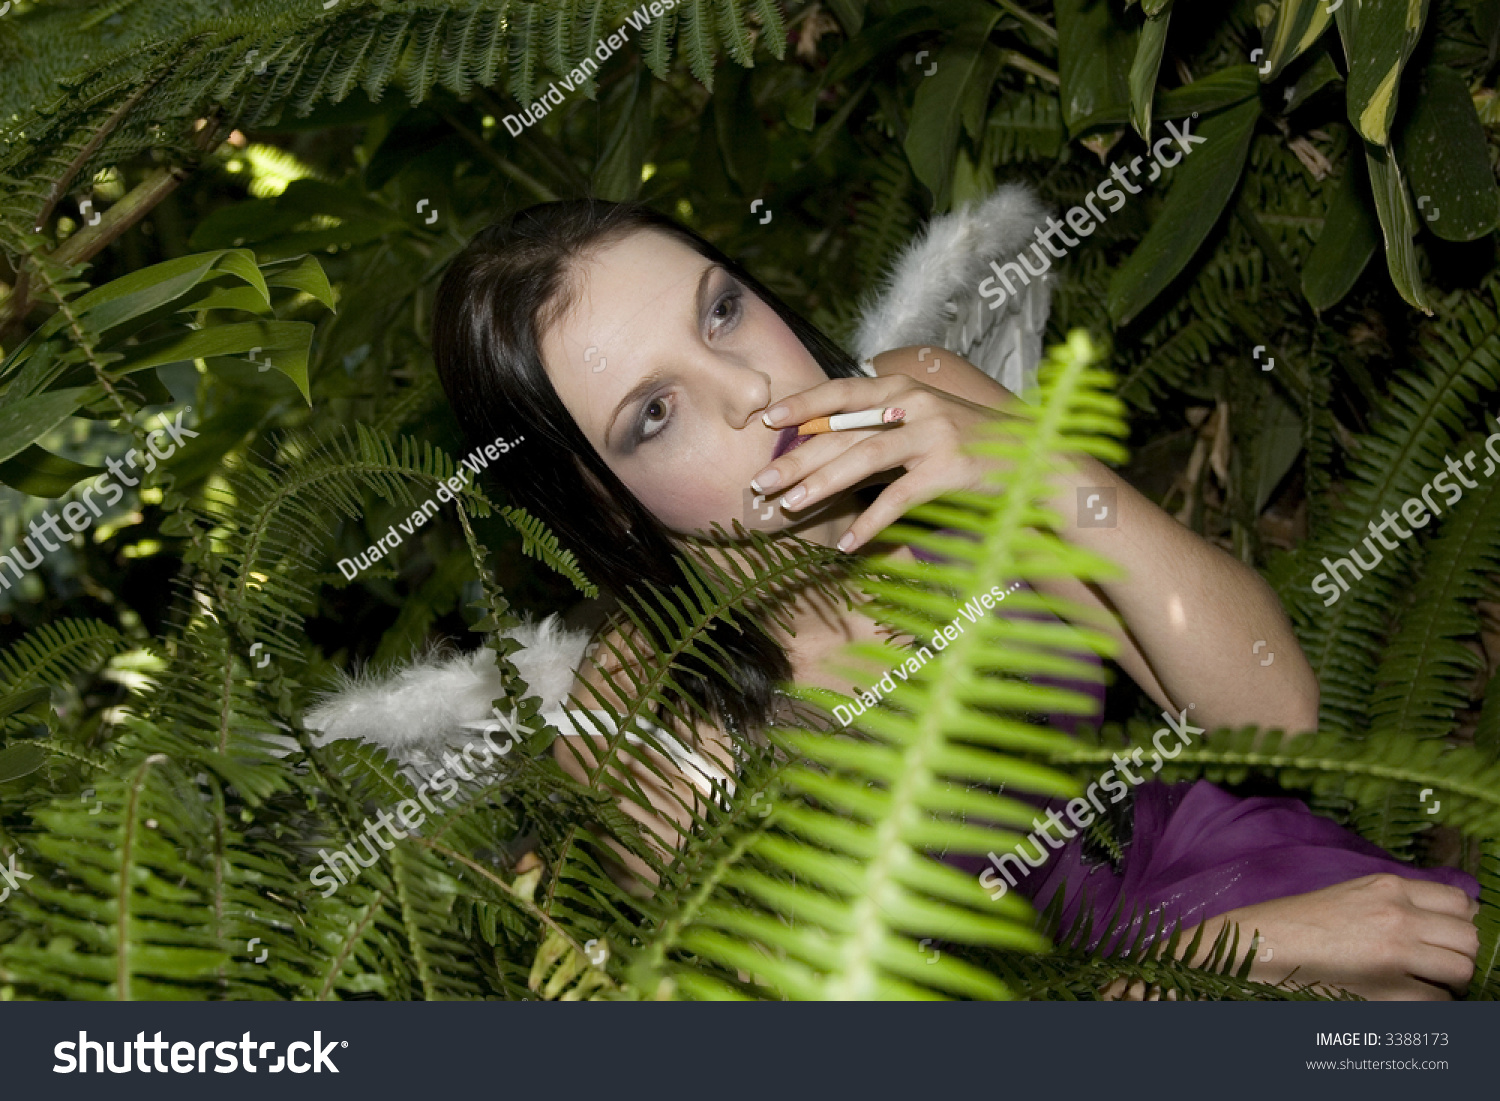 Beautiful Brunette Evil Fairy Busy Smoking A Cigarette In Between Plants Stock Photo